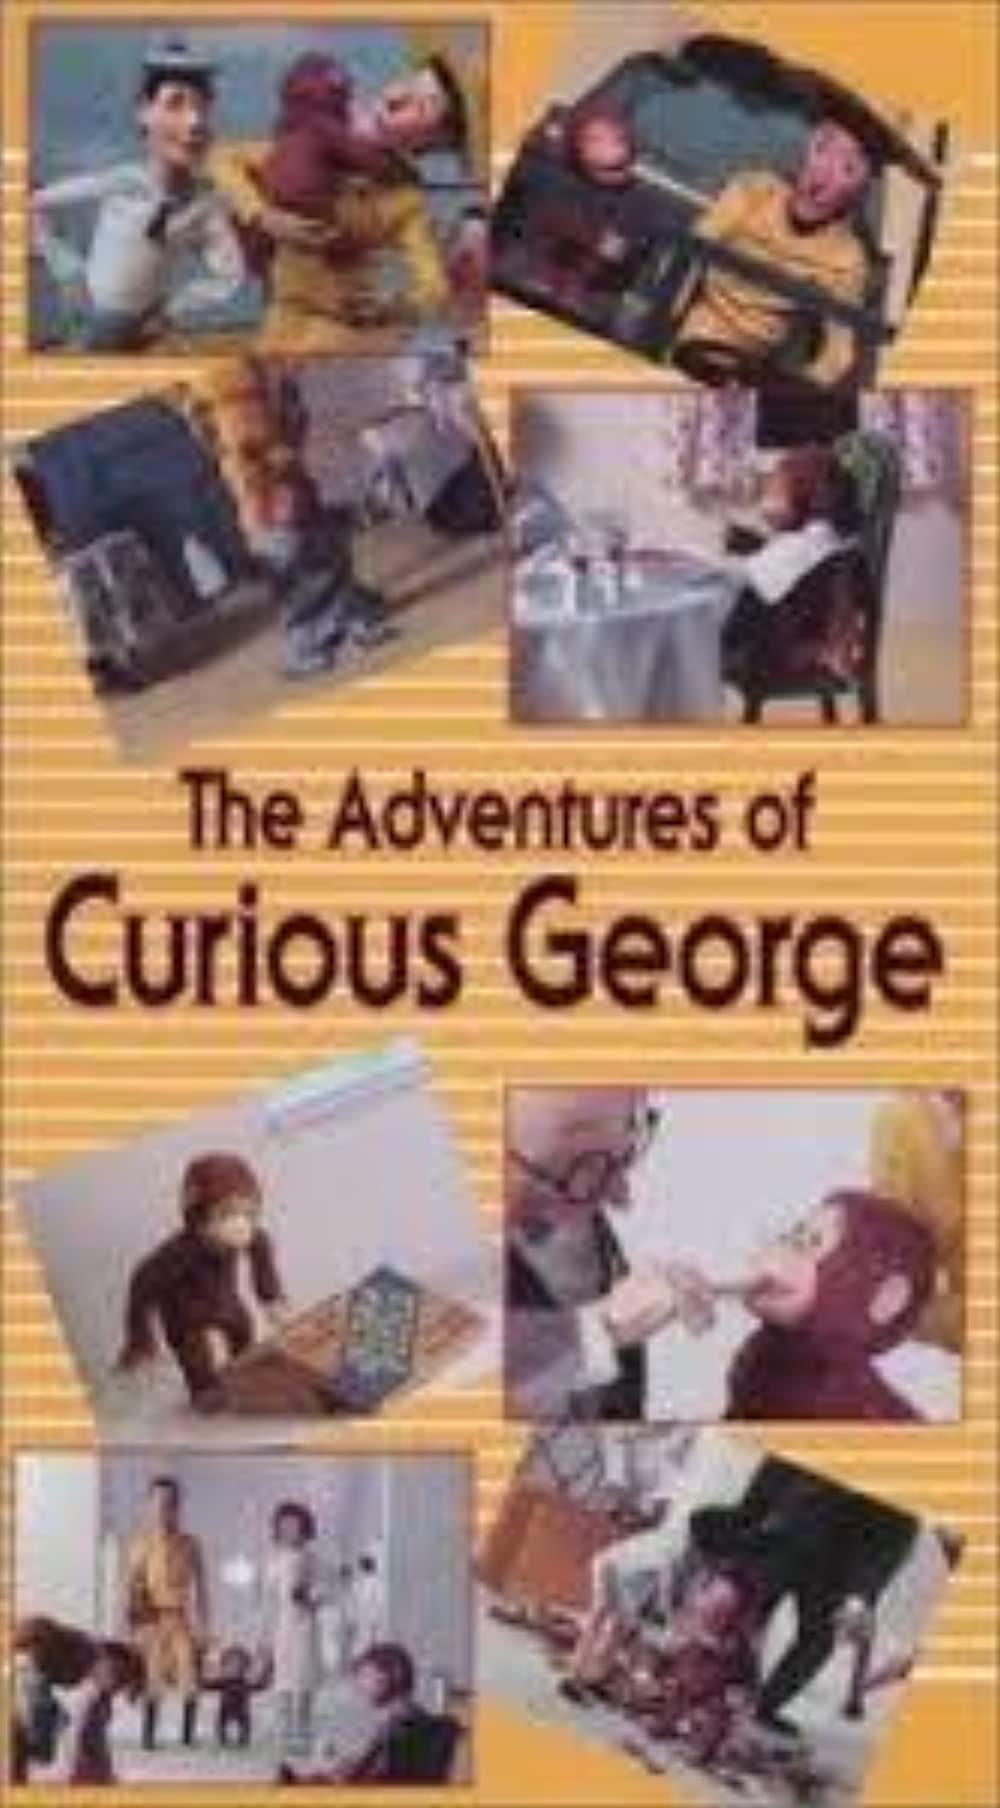 The Adventures of Curious George